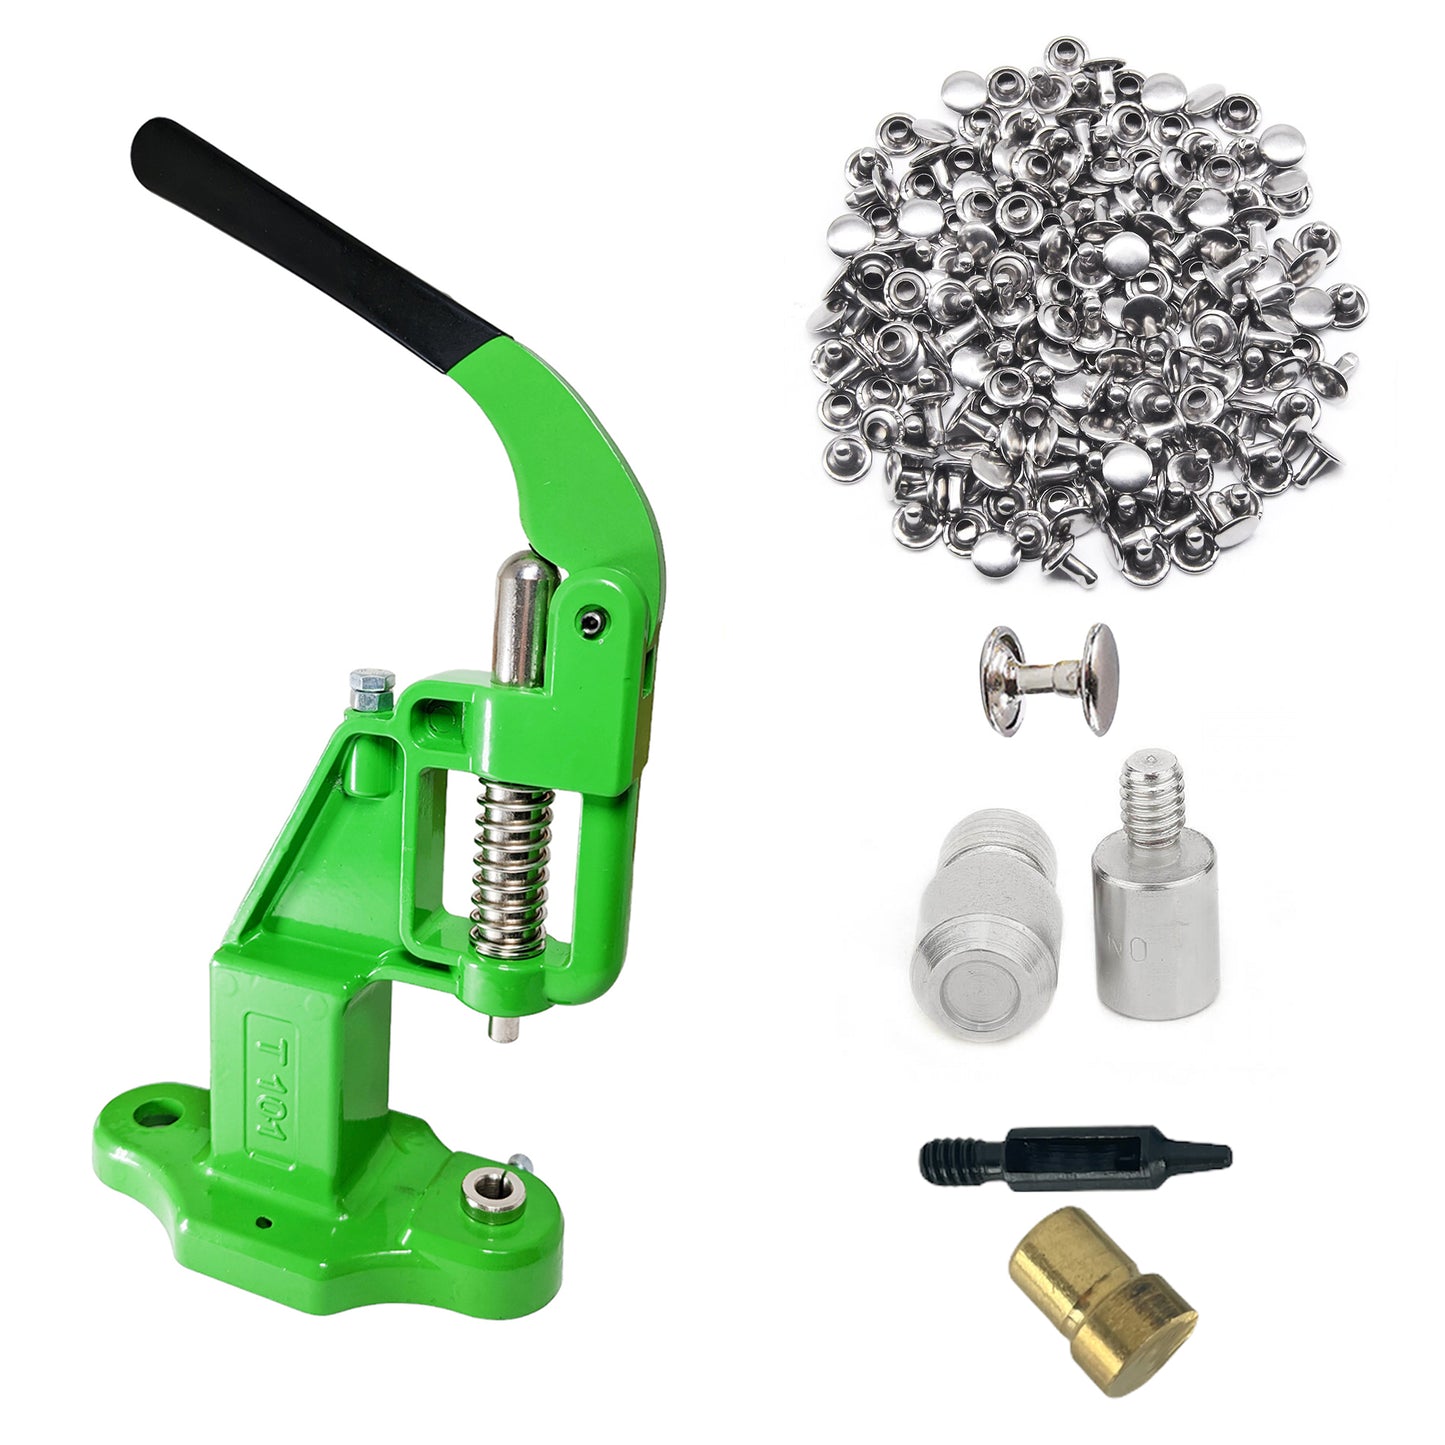 Double Cap 9mm Rivets Kit (1000 pcs) with Hand Press Machine, Dies and Hole Punch - Hobby Trendy